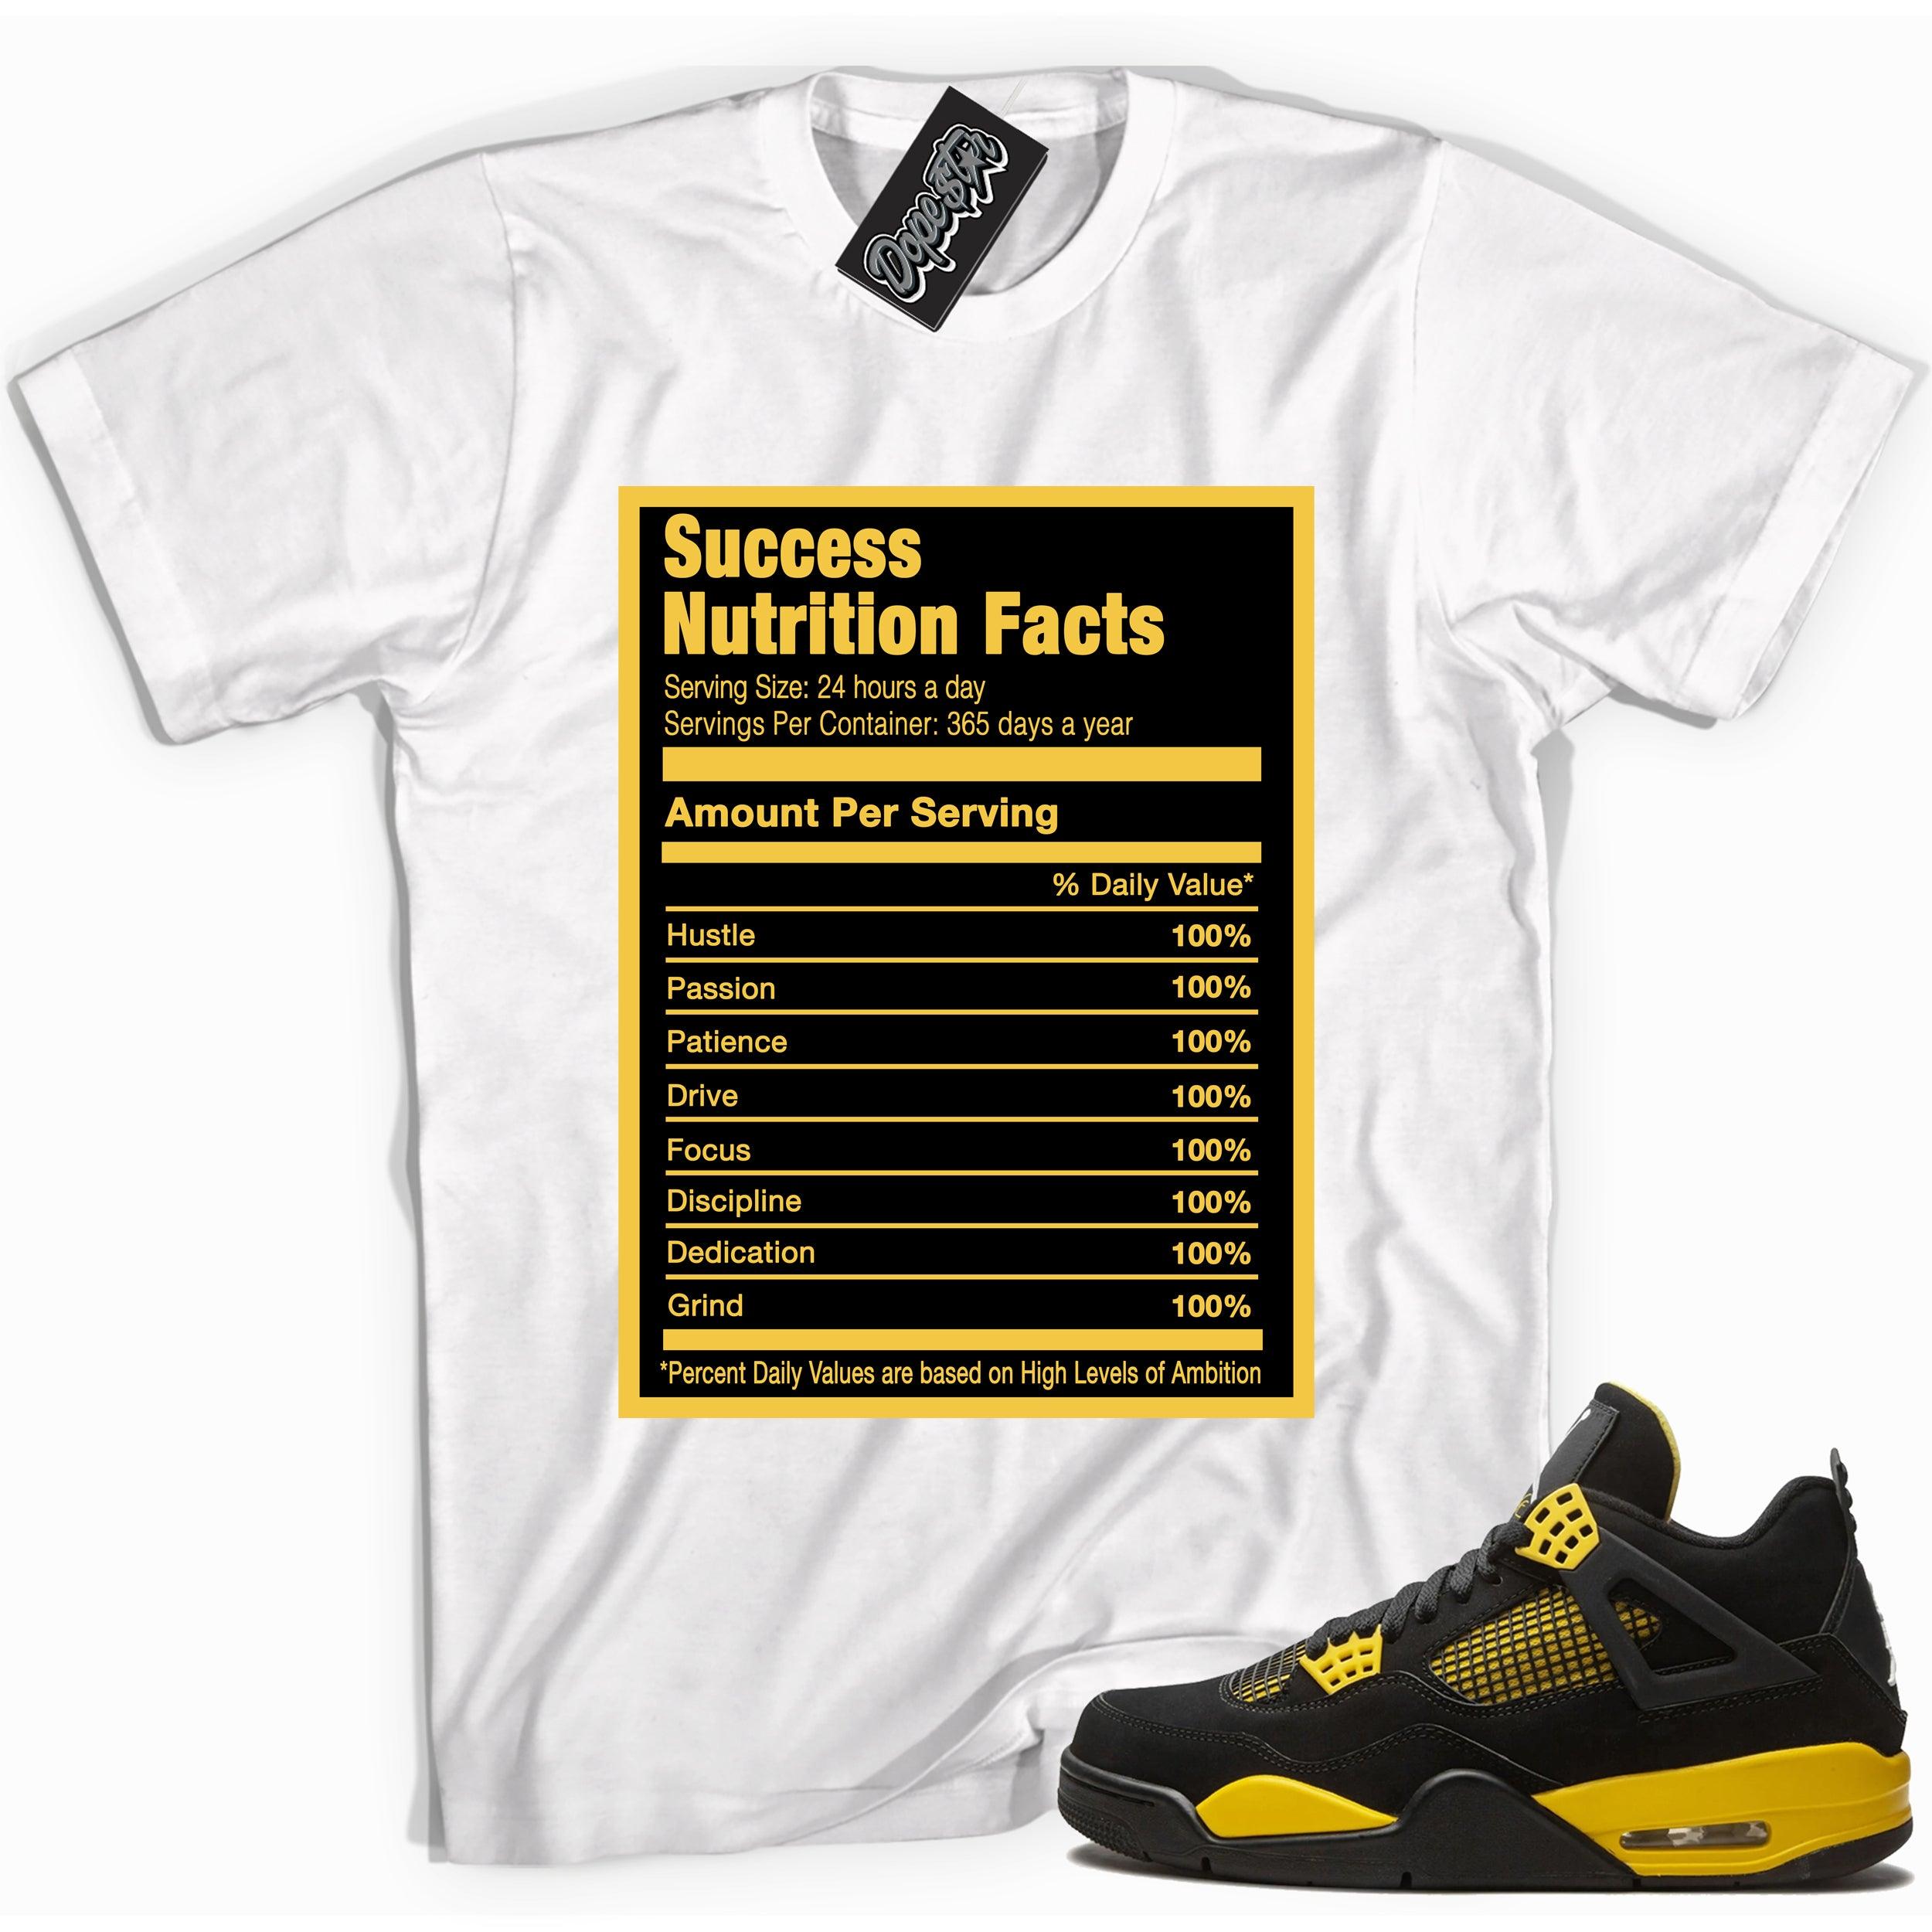 Cool white graphic tee with 'success nutrition facts' print, that perfectly matches Air Jordan 4 Thunder sneakers